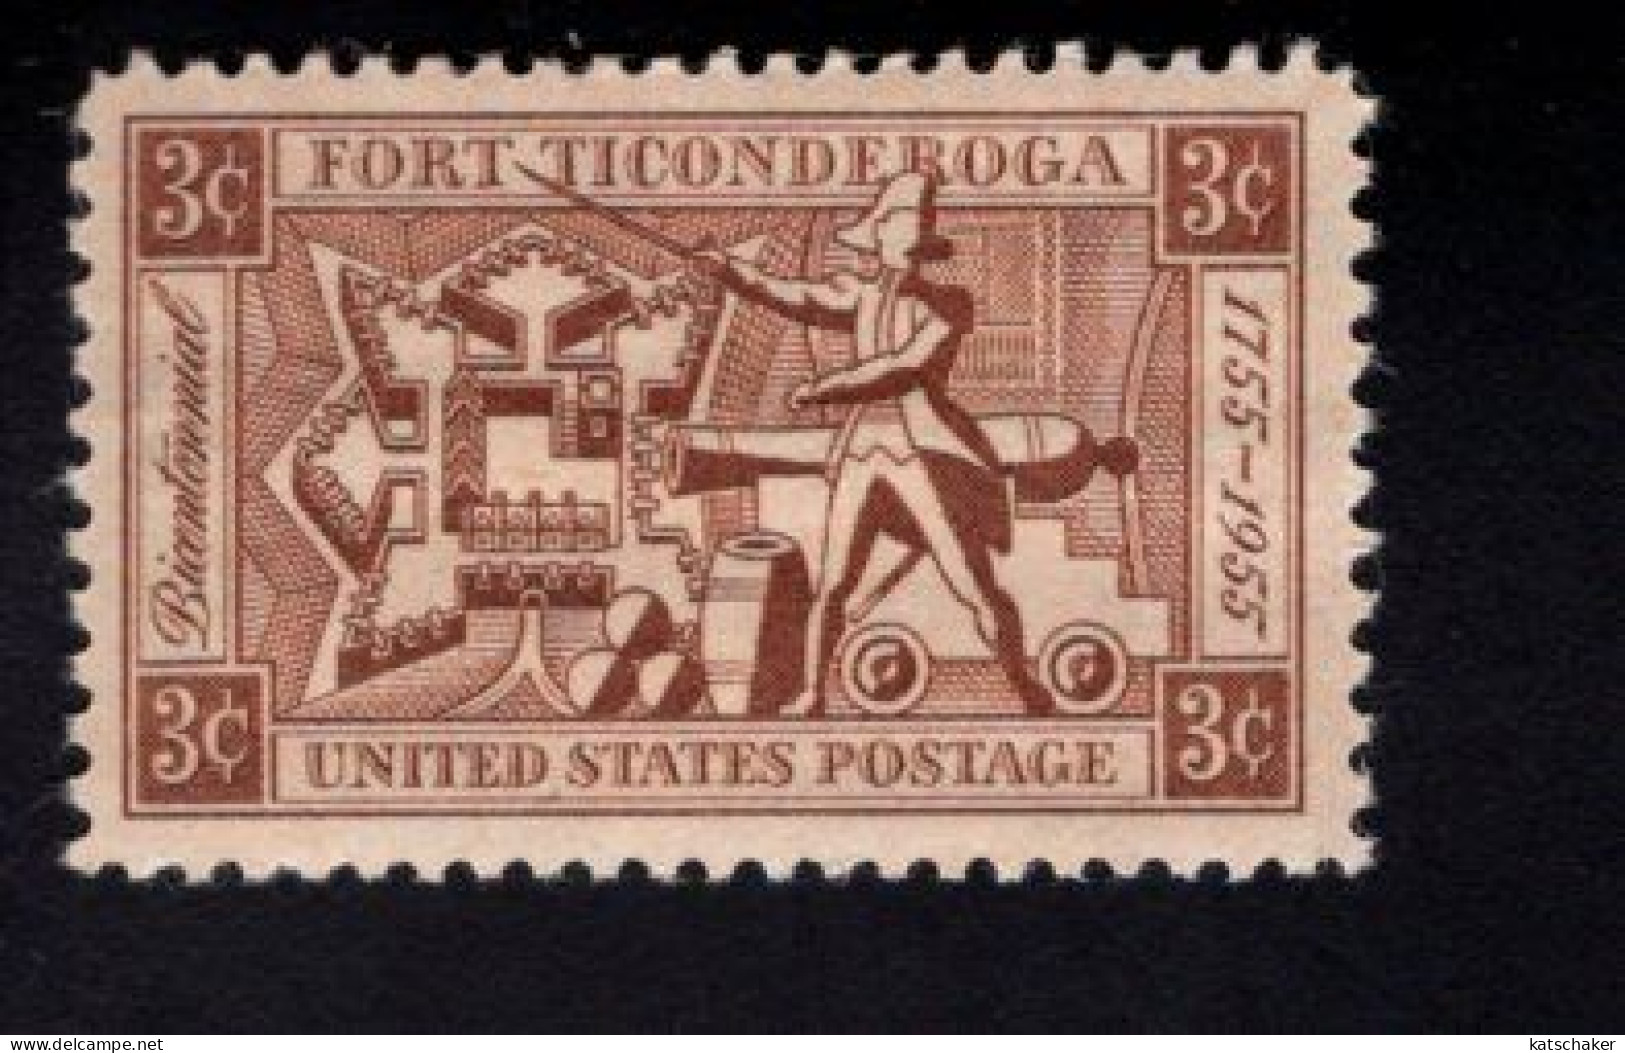 2018737274 1955 SCOTT 1071 (XX) POSTFRIS MINT NEVER HINGED  - FORT TICONDEROGA ISSUE - MAP OF THE FORT - Nuovi